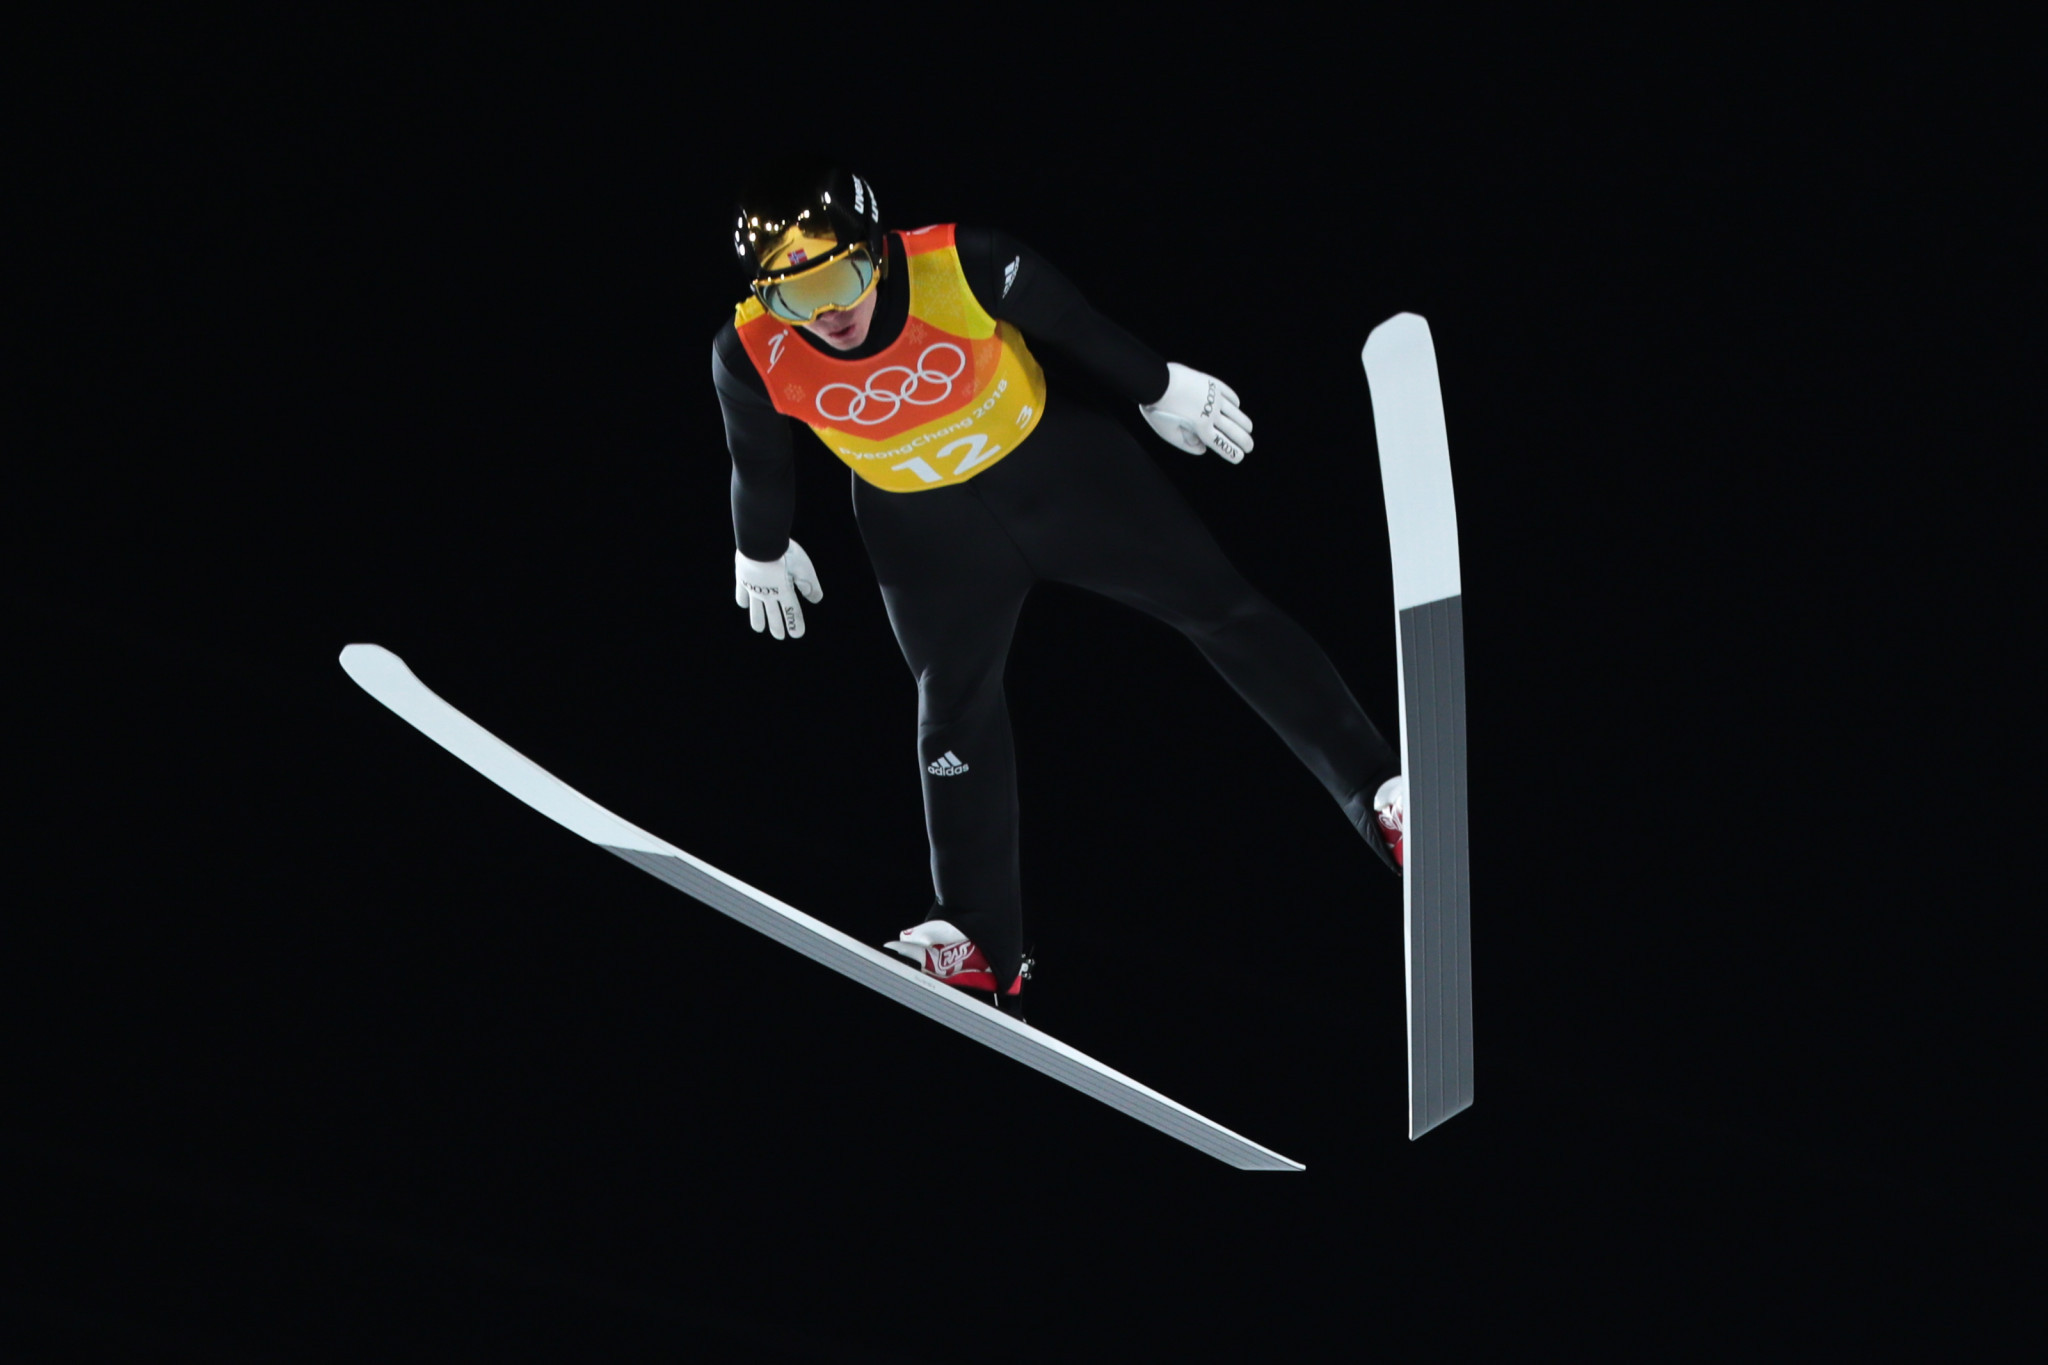 Forfang leads qualifying at Ski Jumping World Cup Finals in Planica